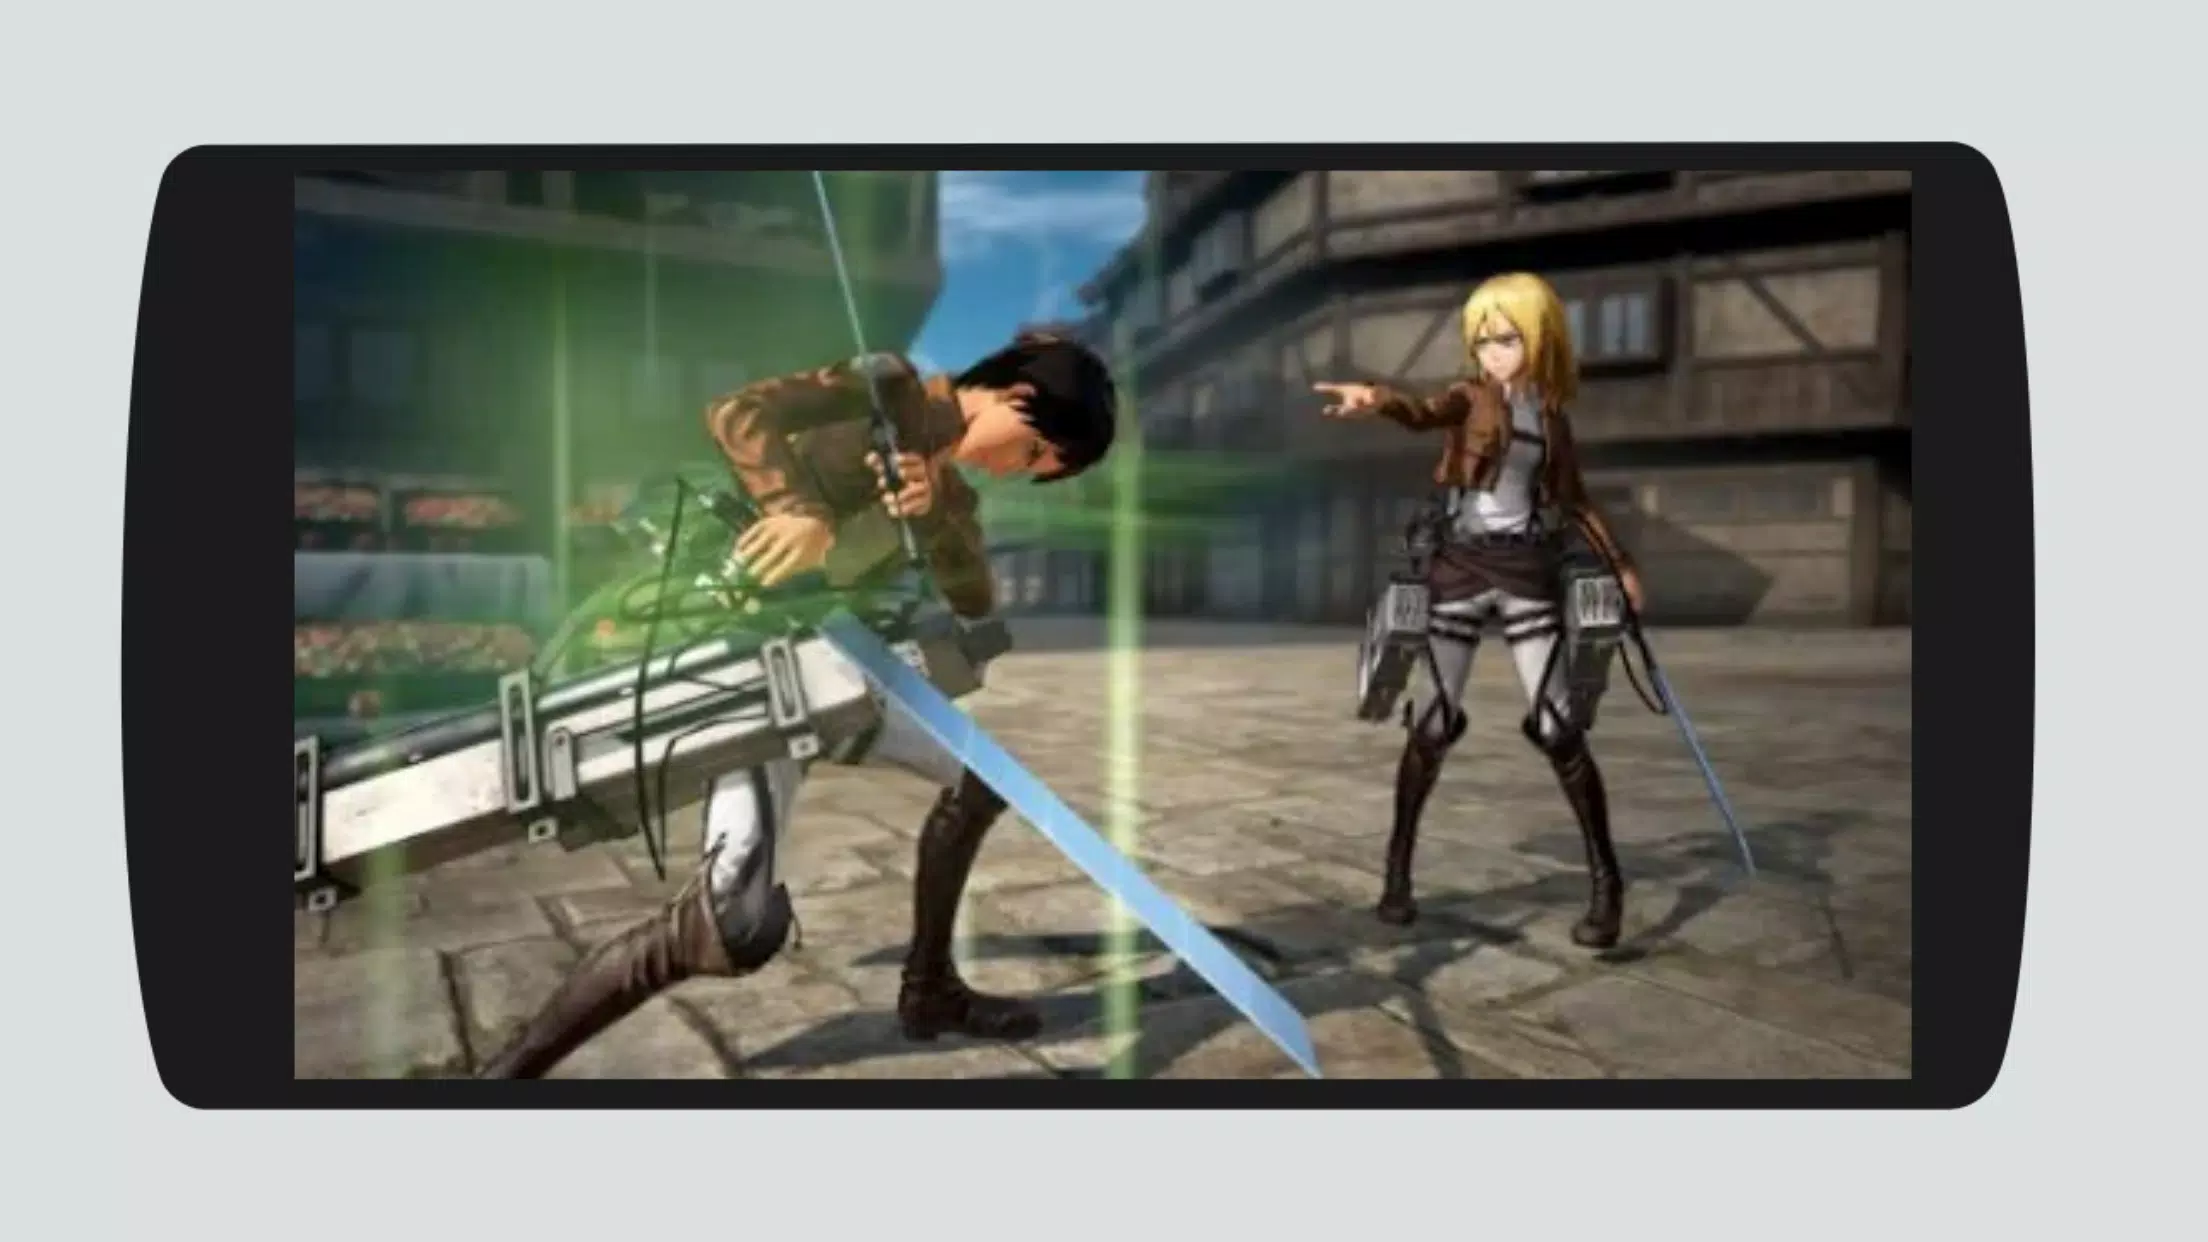 Attack on Titan 2 A O T 2 version móvil androide iOS-TapTap